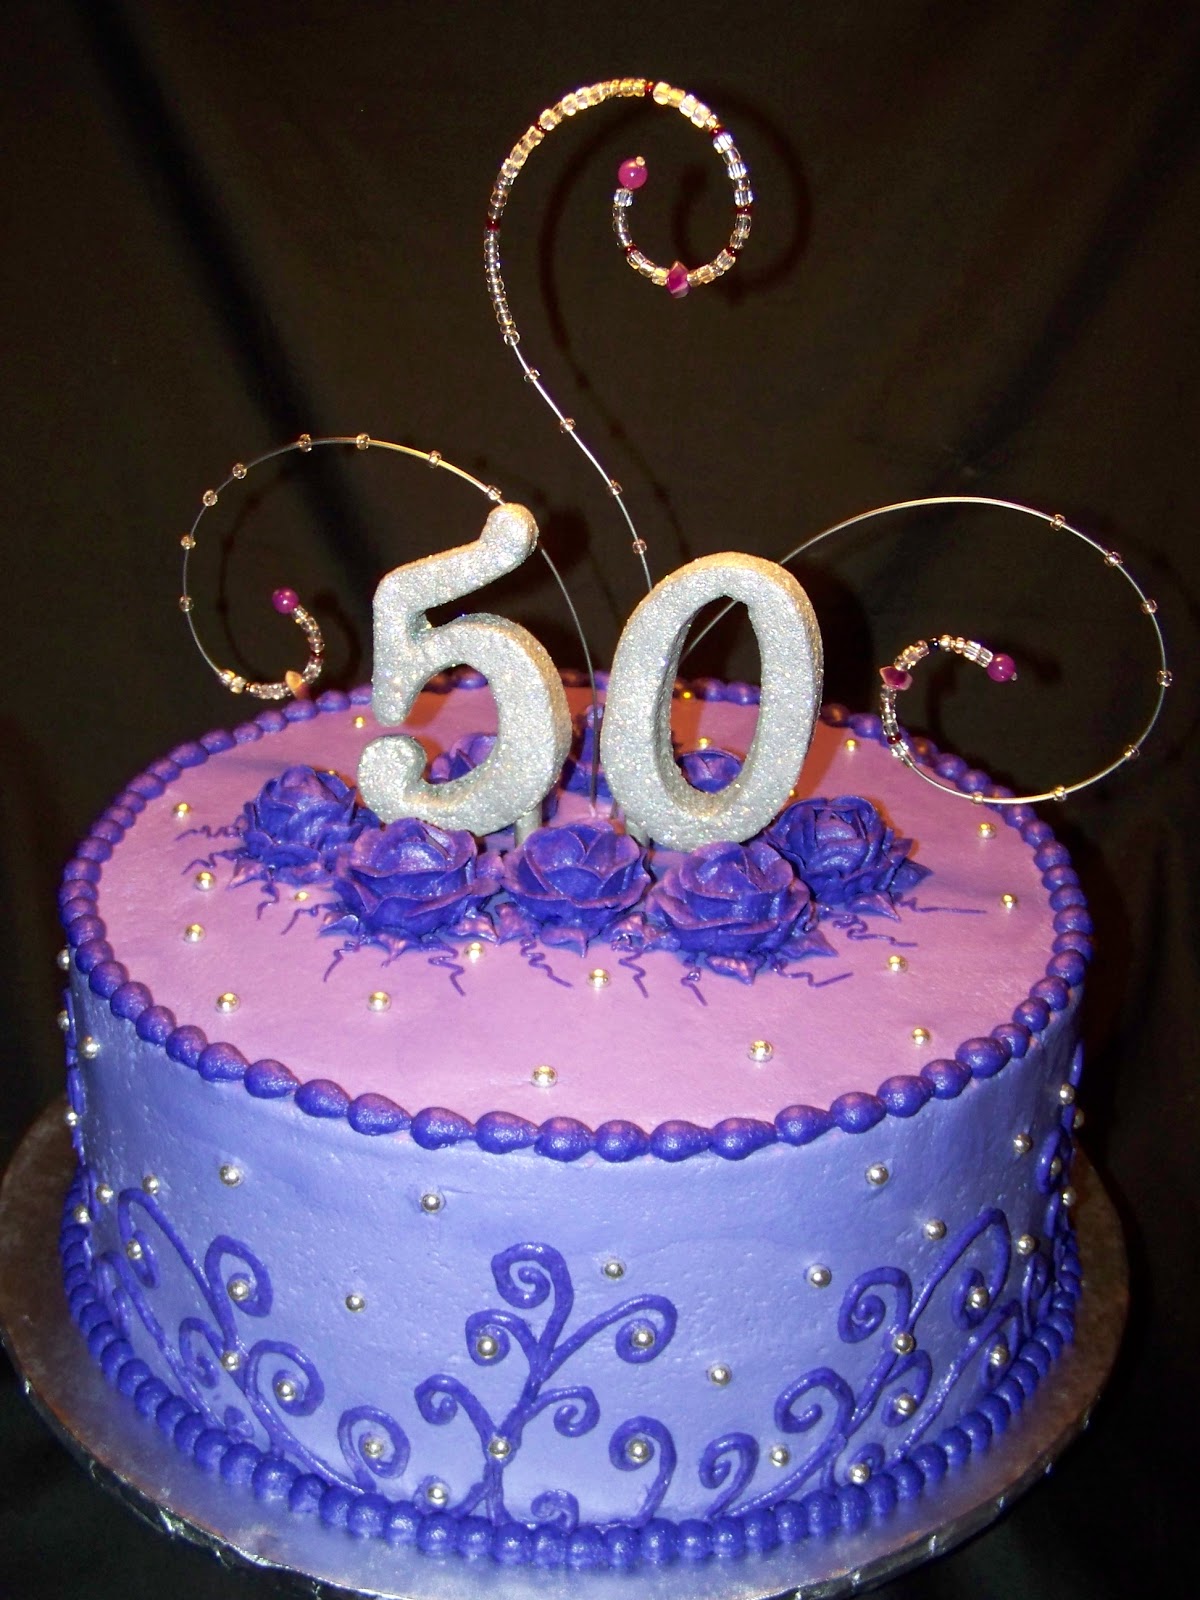  Cakes  by Kristen H Purple and Bling 50th  Birthday  Cake 